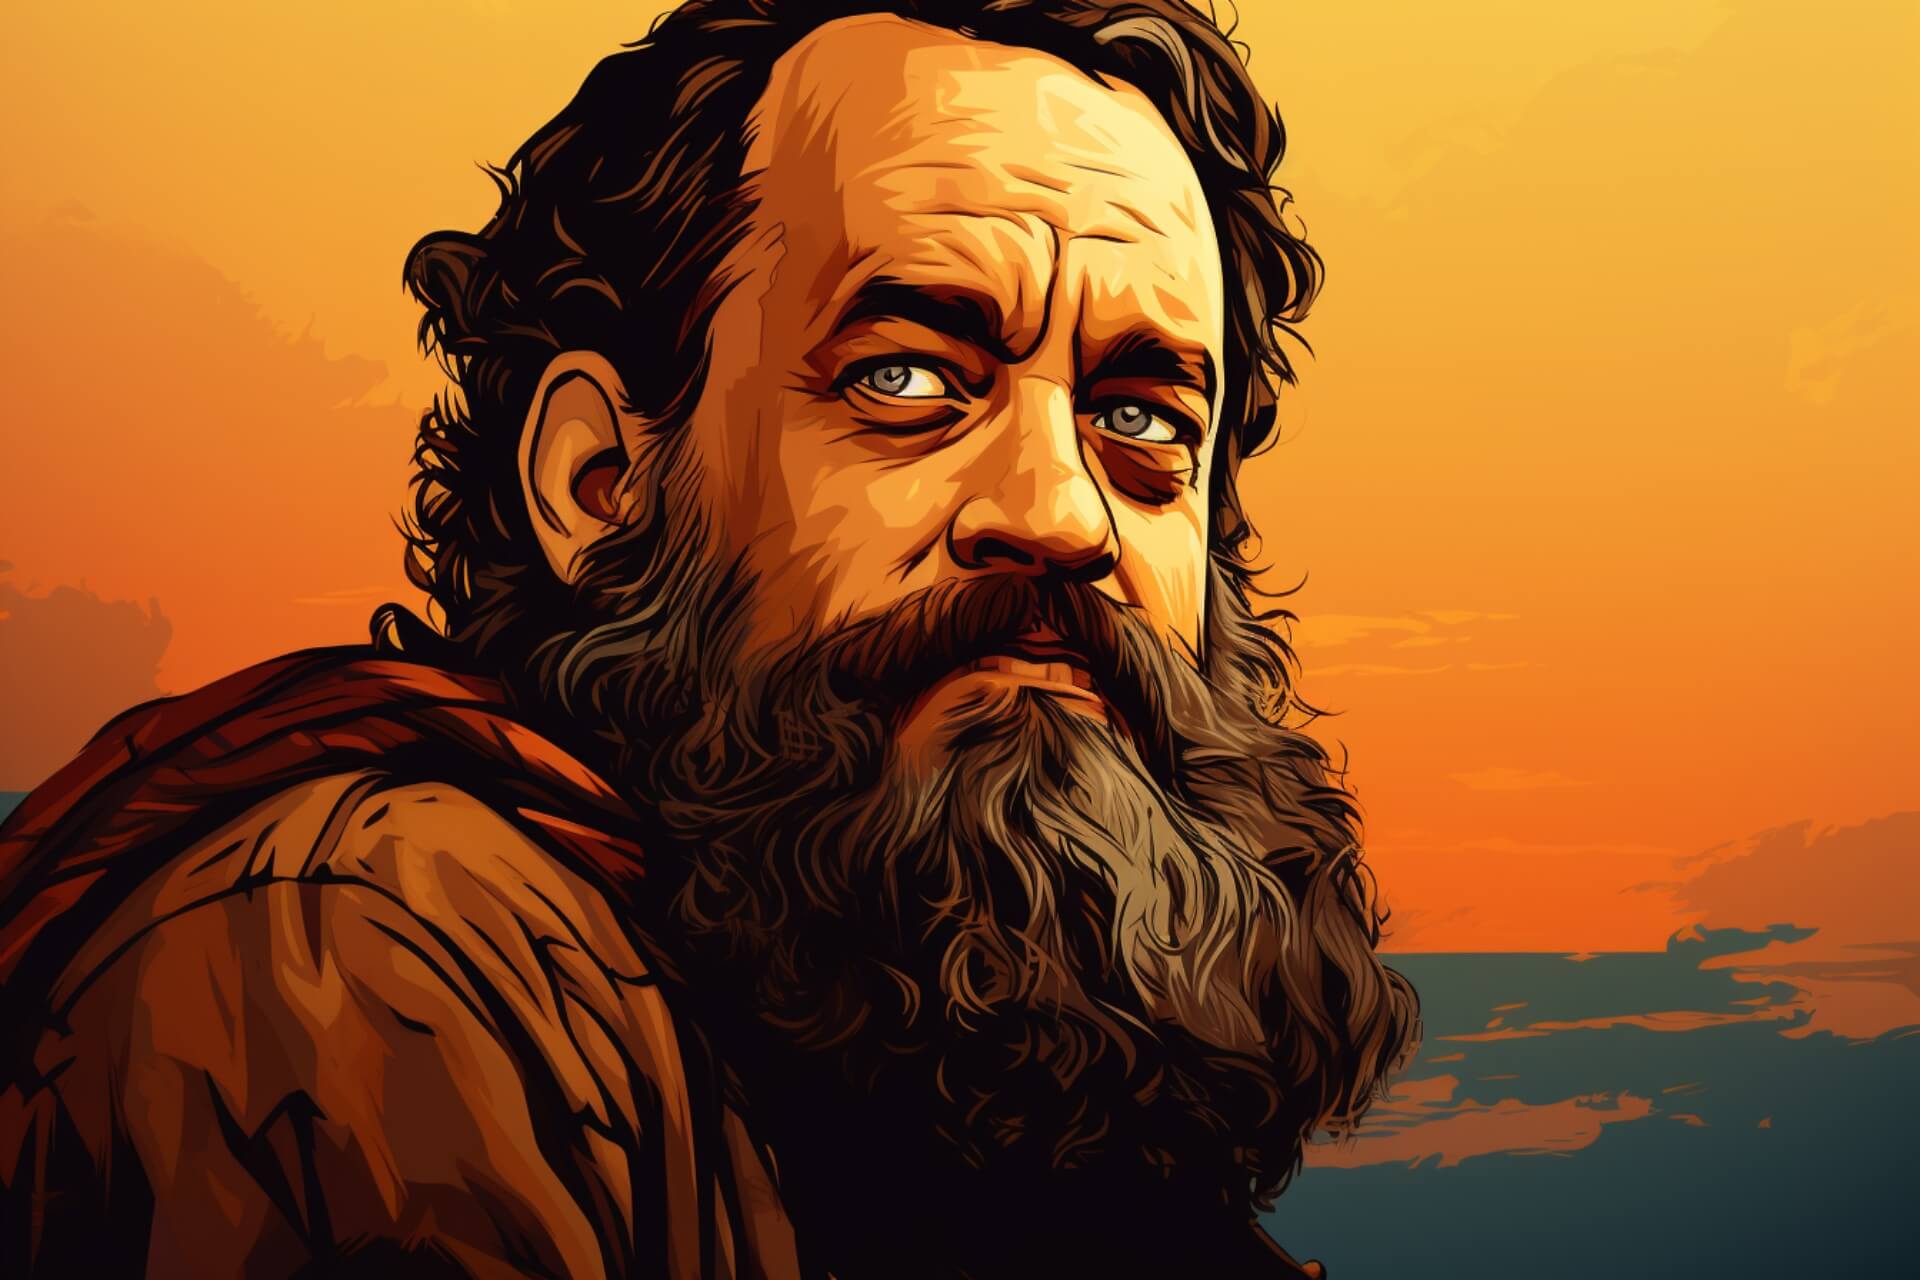 Illustration of Tom Hanks with a large beard